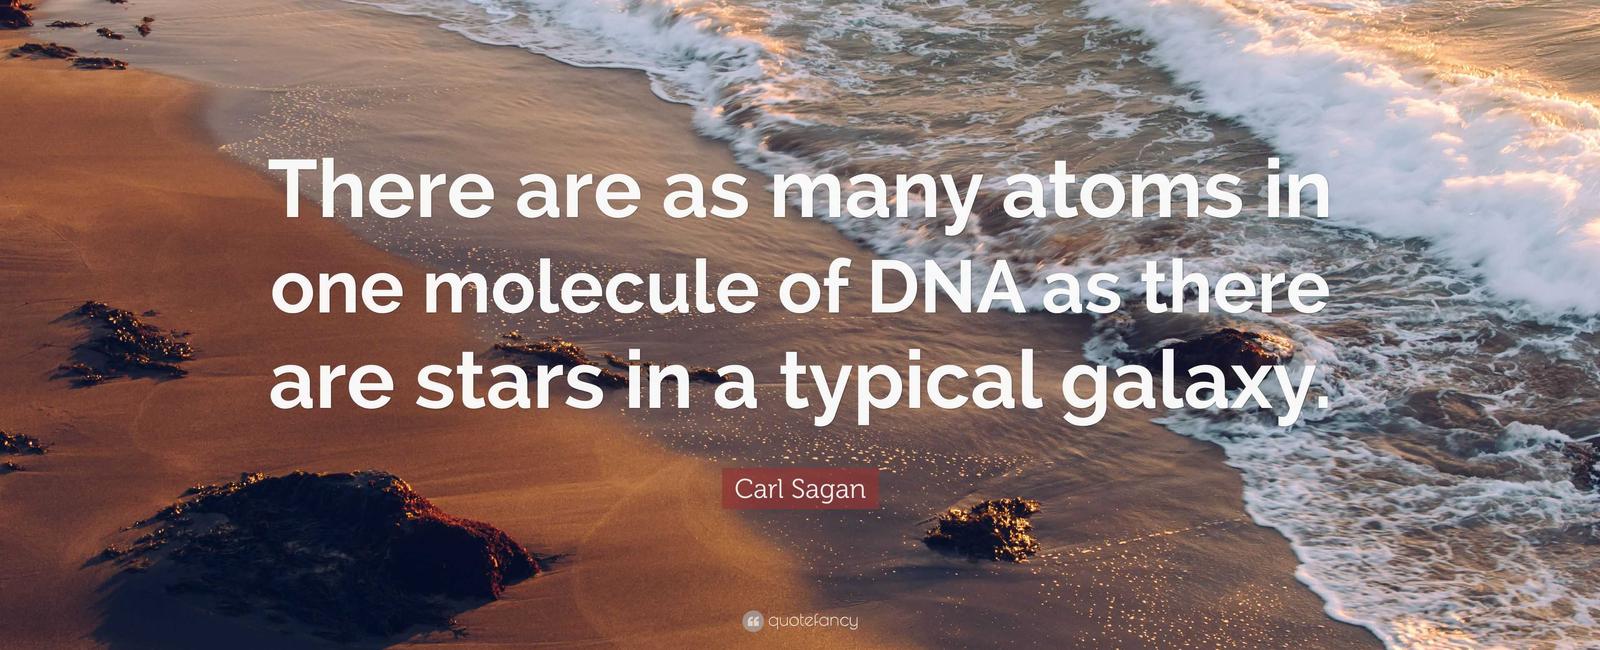 Many of the atoms you re made of from the calcium in your bones to the iron in your blood were brewed up in the heart of an exploding star billions of years ago